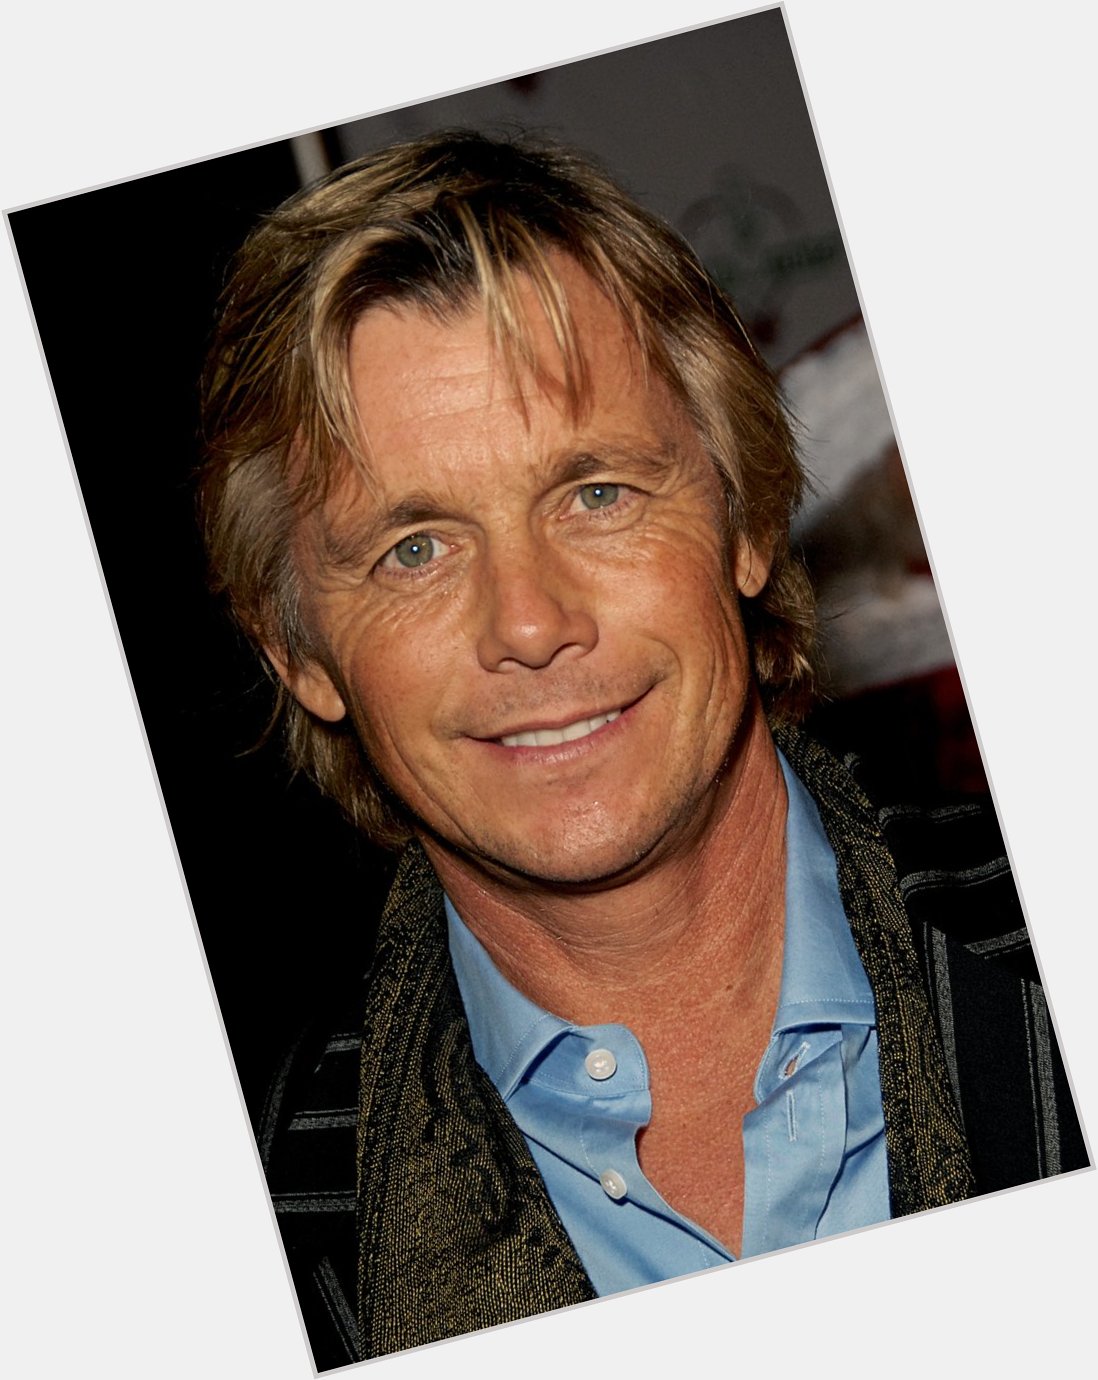 Happy Birthday to actor Christopher Atkins born on February 21, 1961 